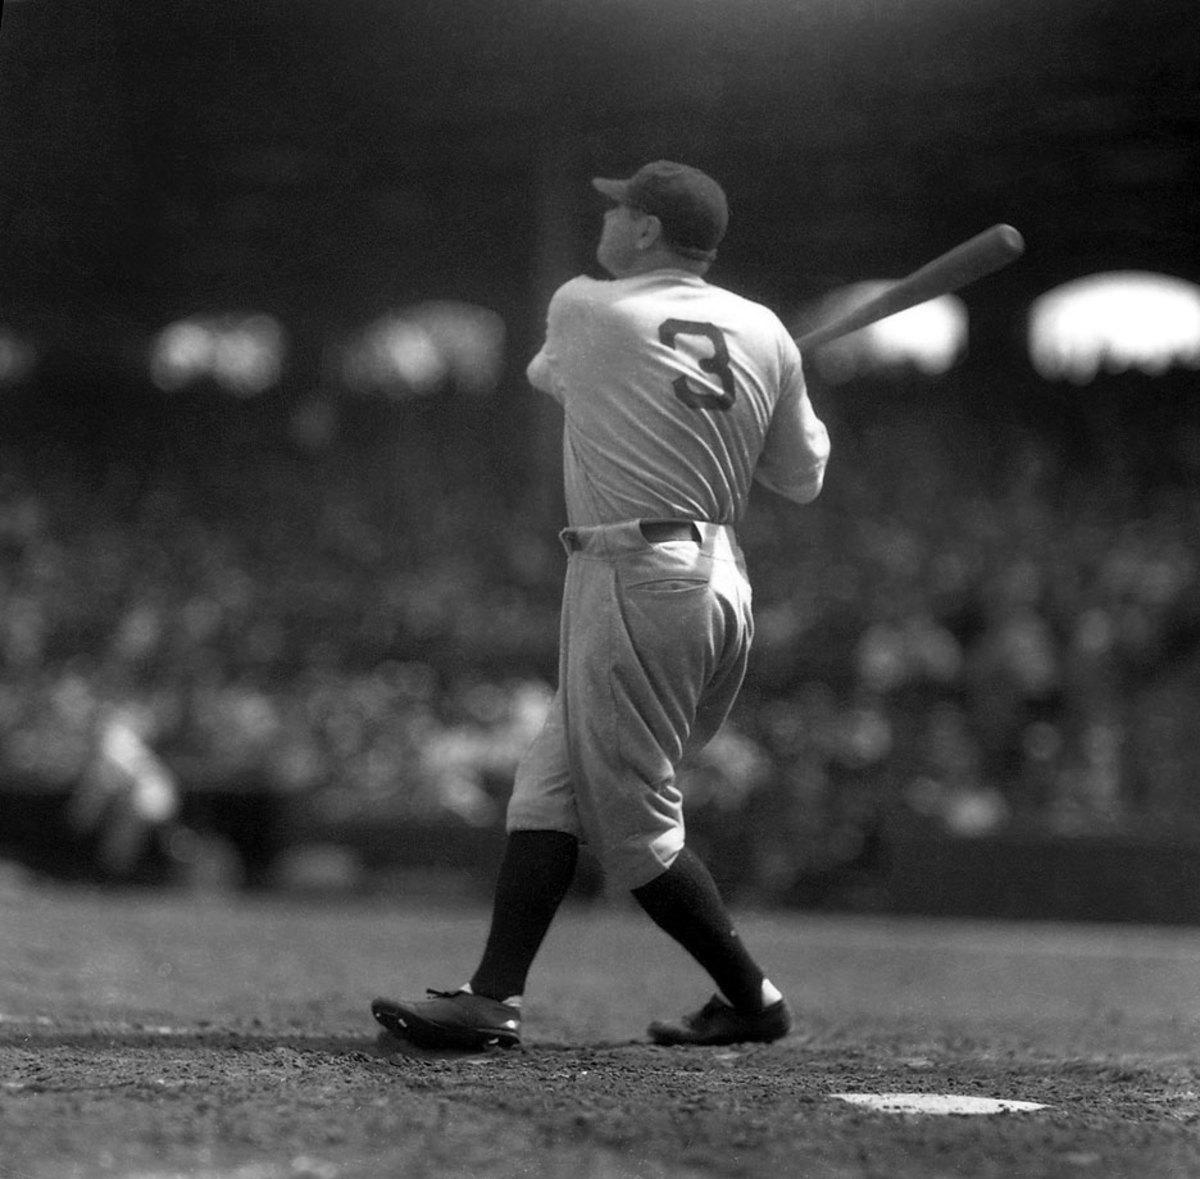 Yankees retired numbers and the baseball legends who wore them